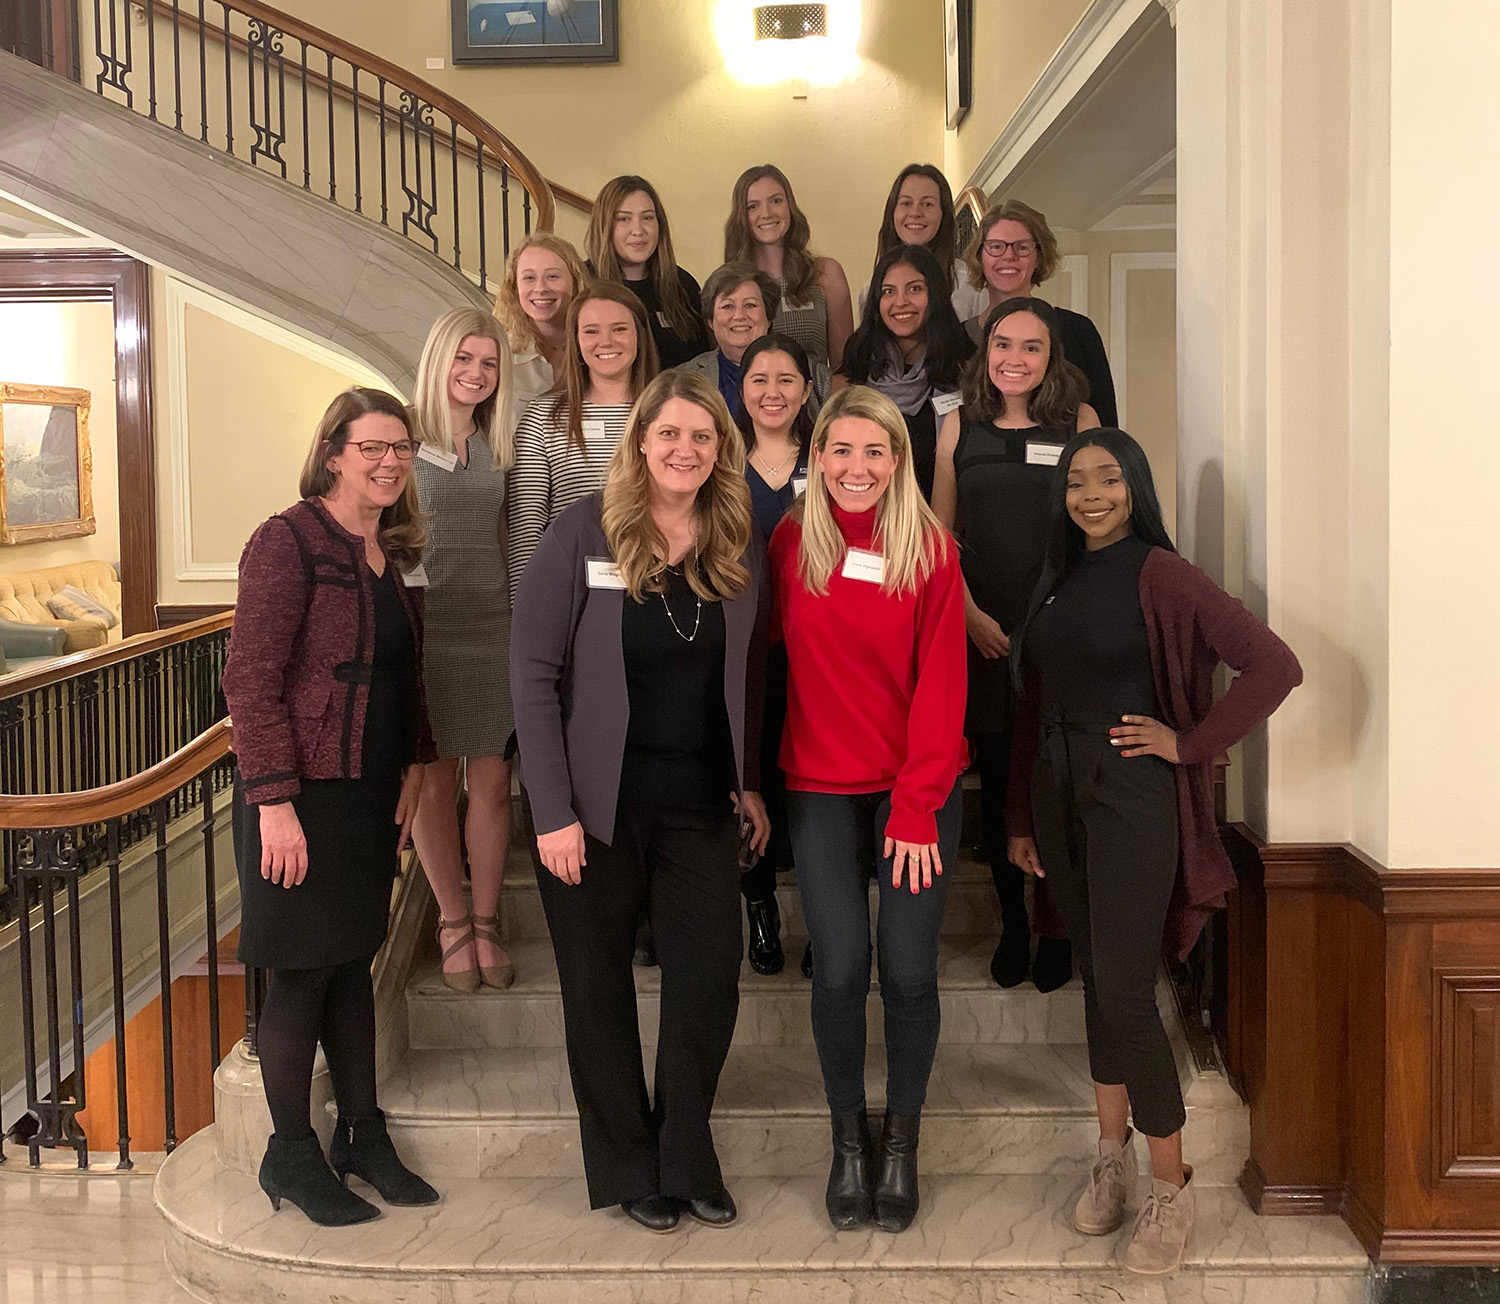 Students in the Women in Finance group gather with alumna Joanna Rupp and other alumnae in Chicago